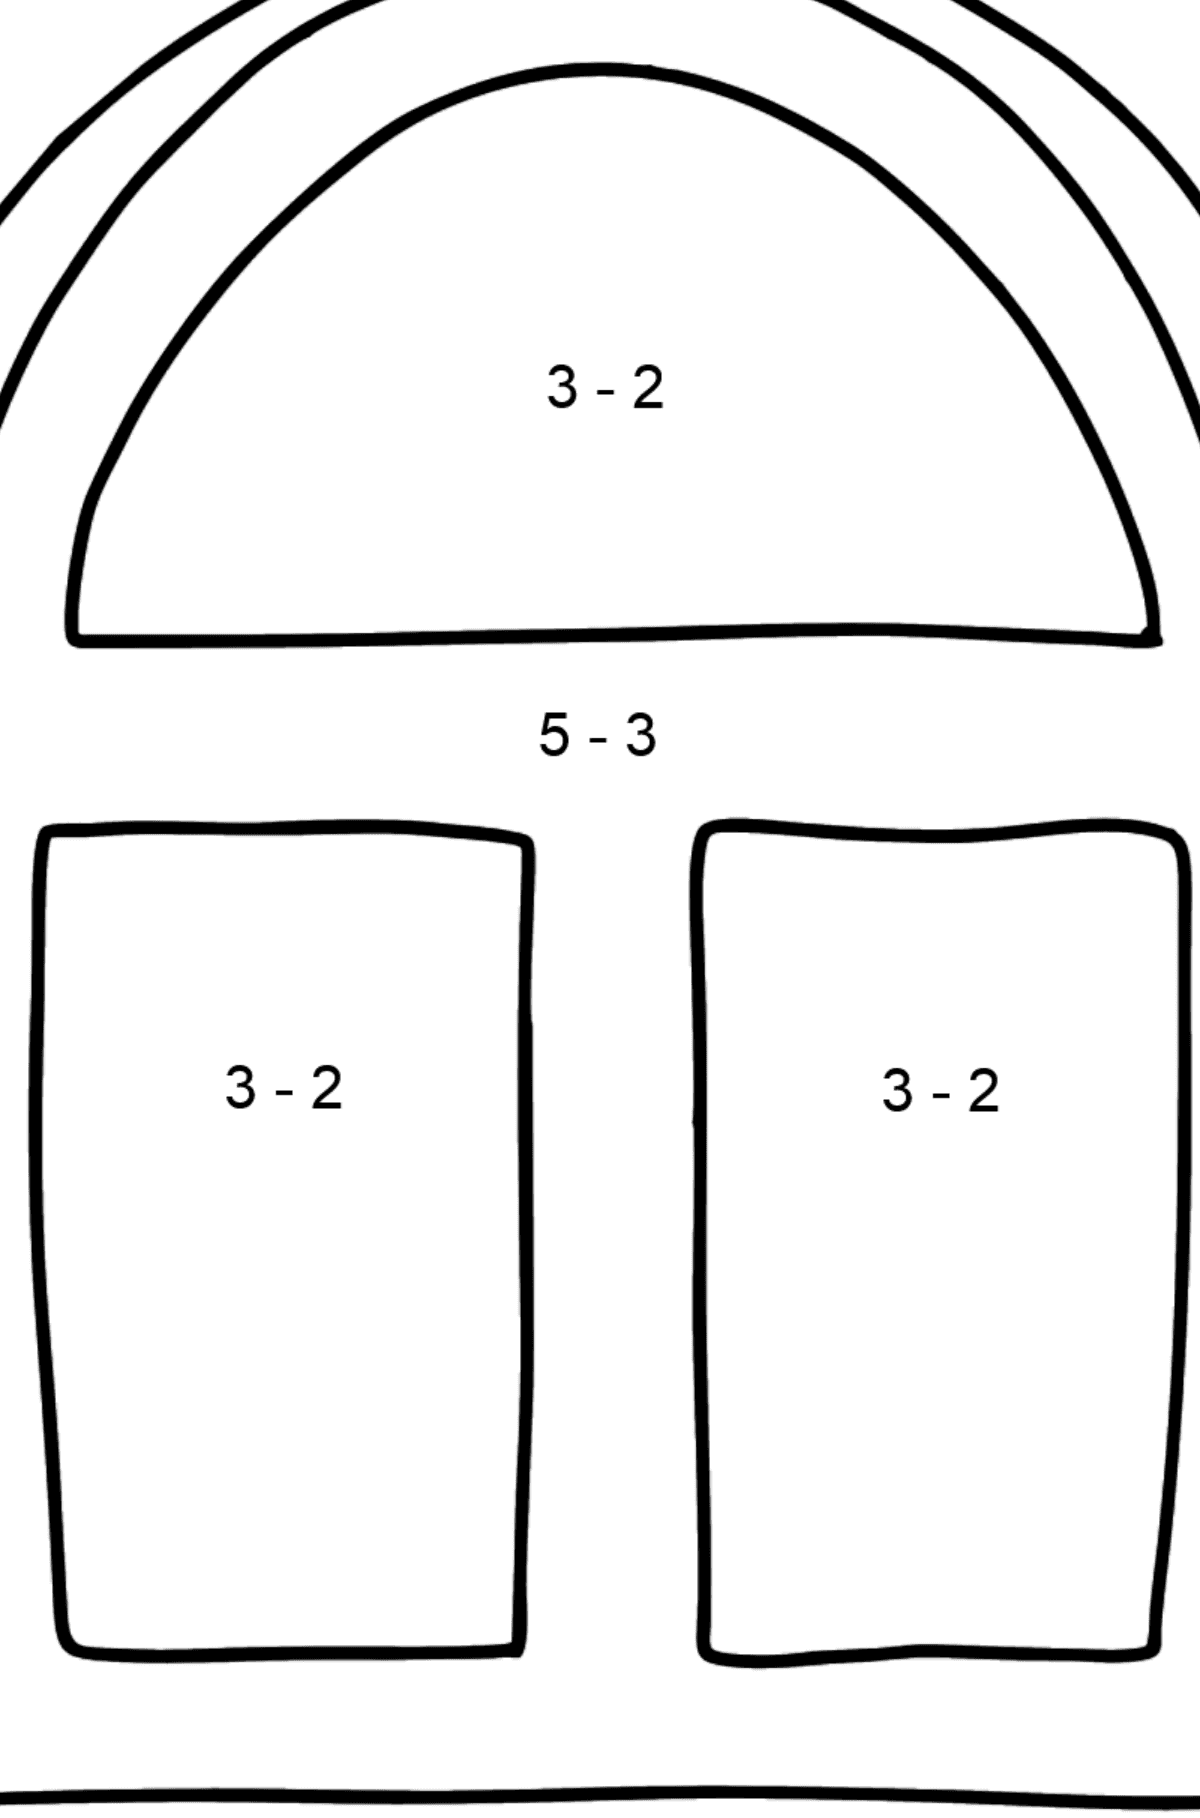 Window coloring page - Math Coloring - Subtraction for Kids